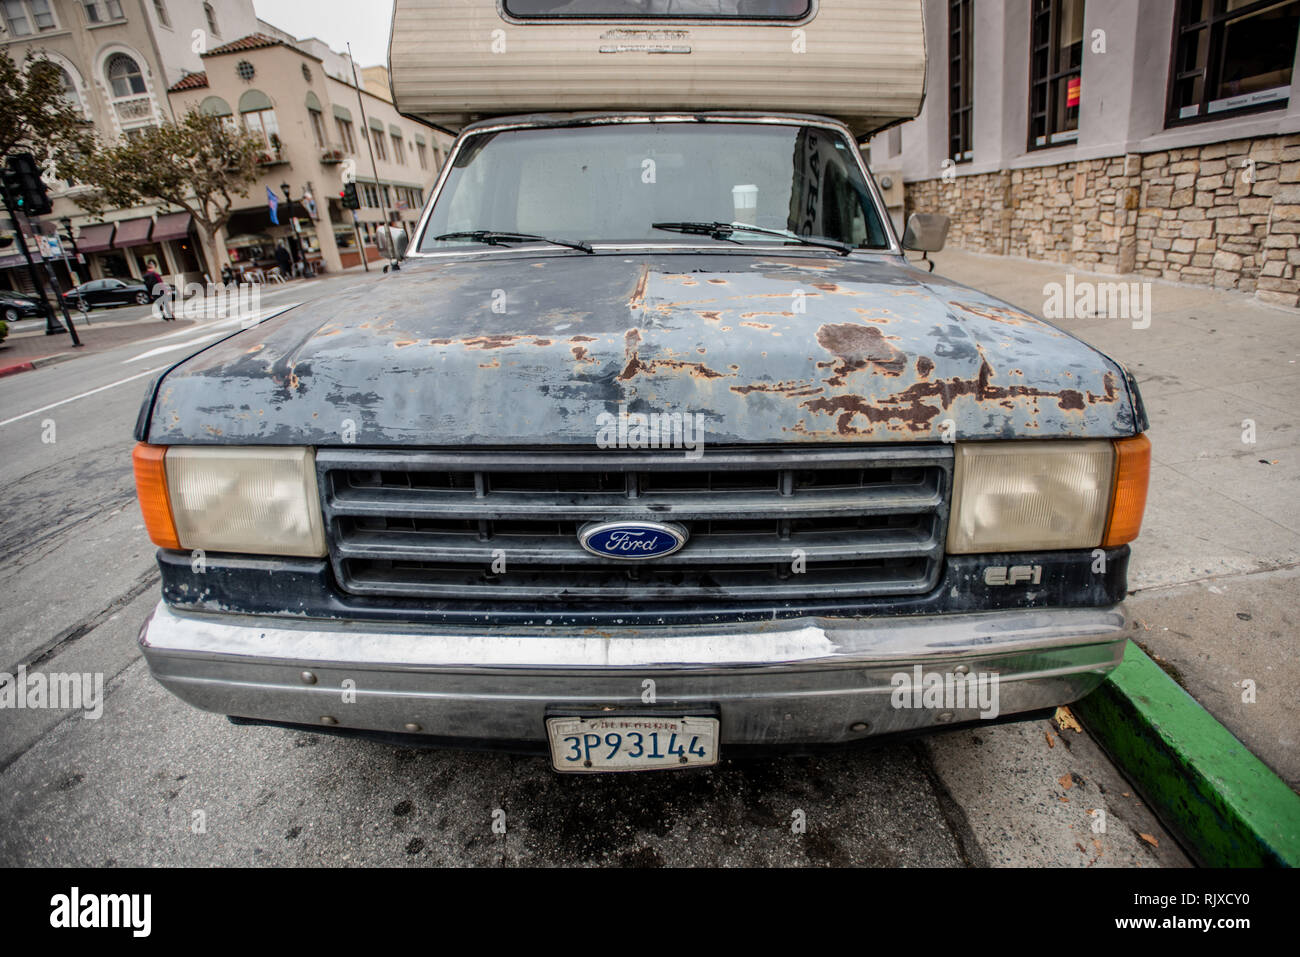 Beat up Ford vehicle. Stock Photo